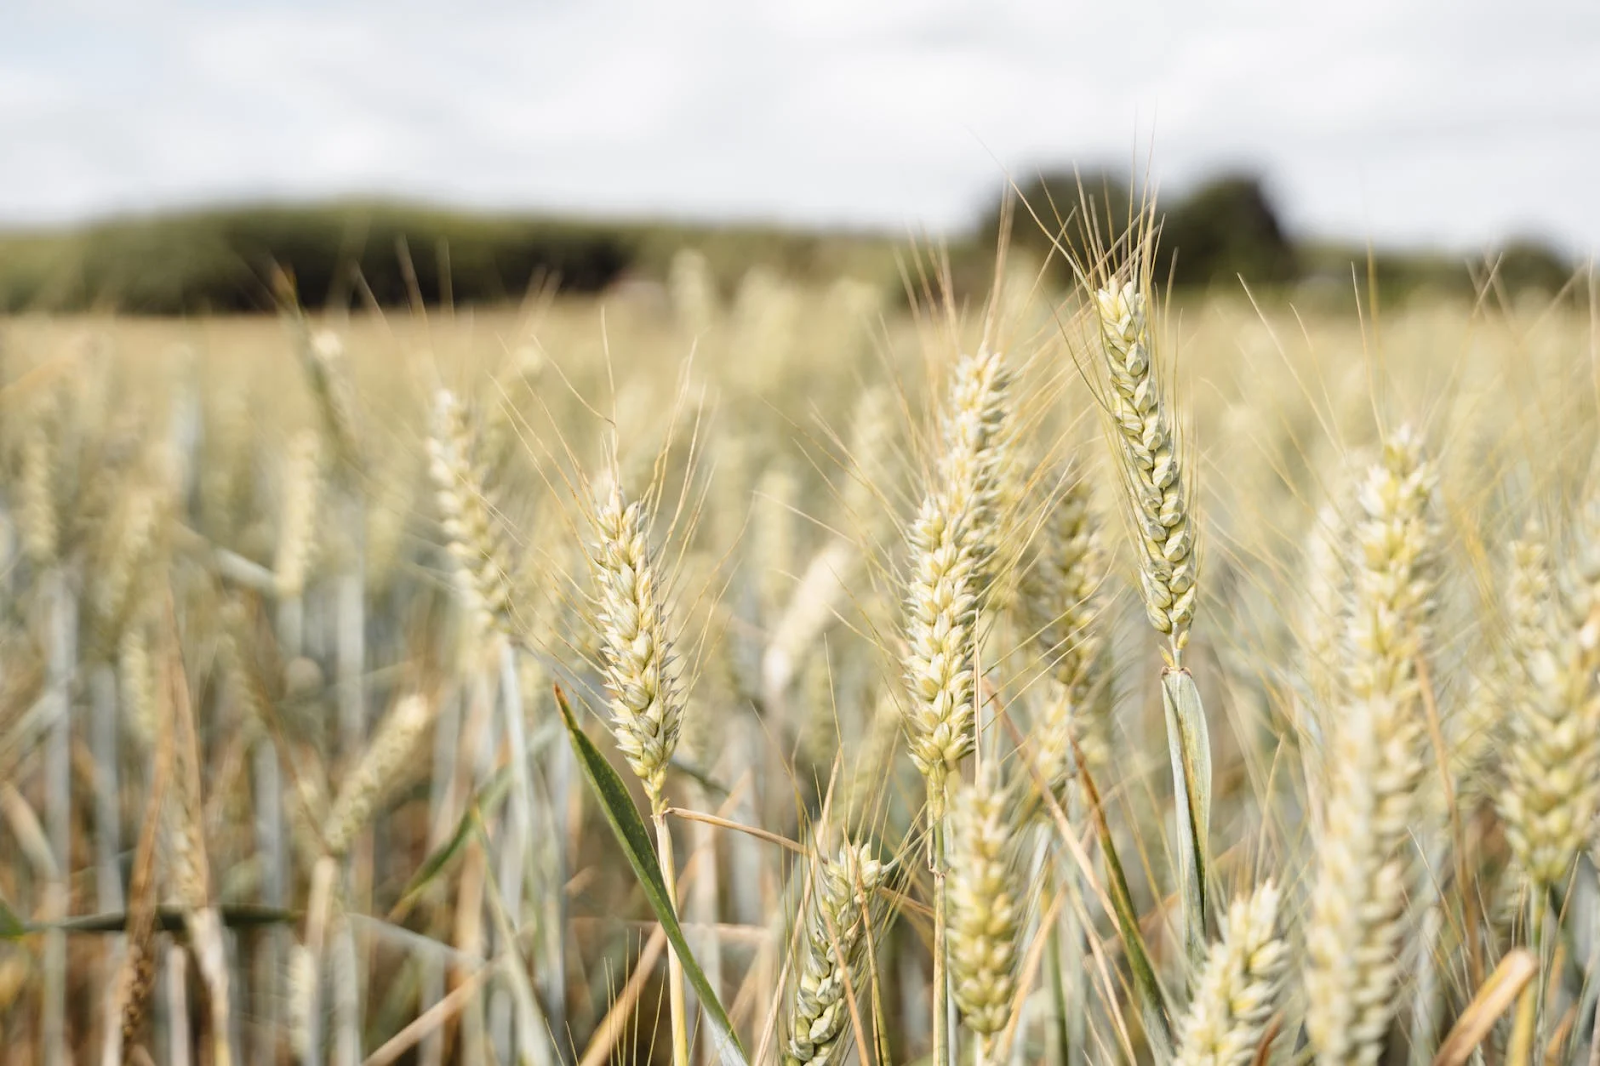 A field of wheat

Description automatically generated with medium confidence